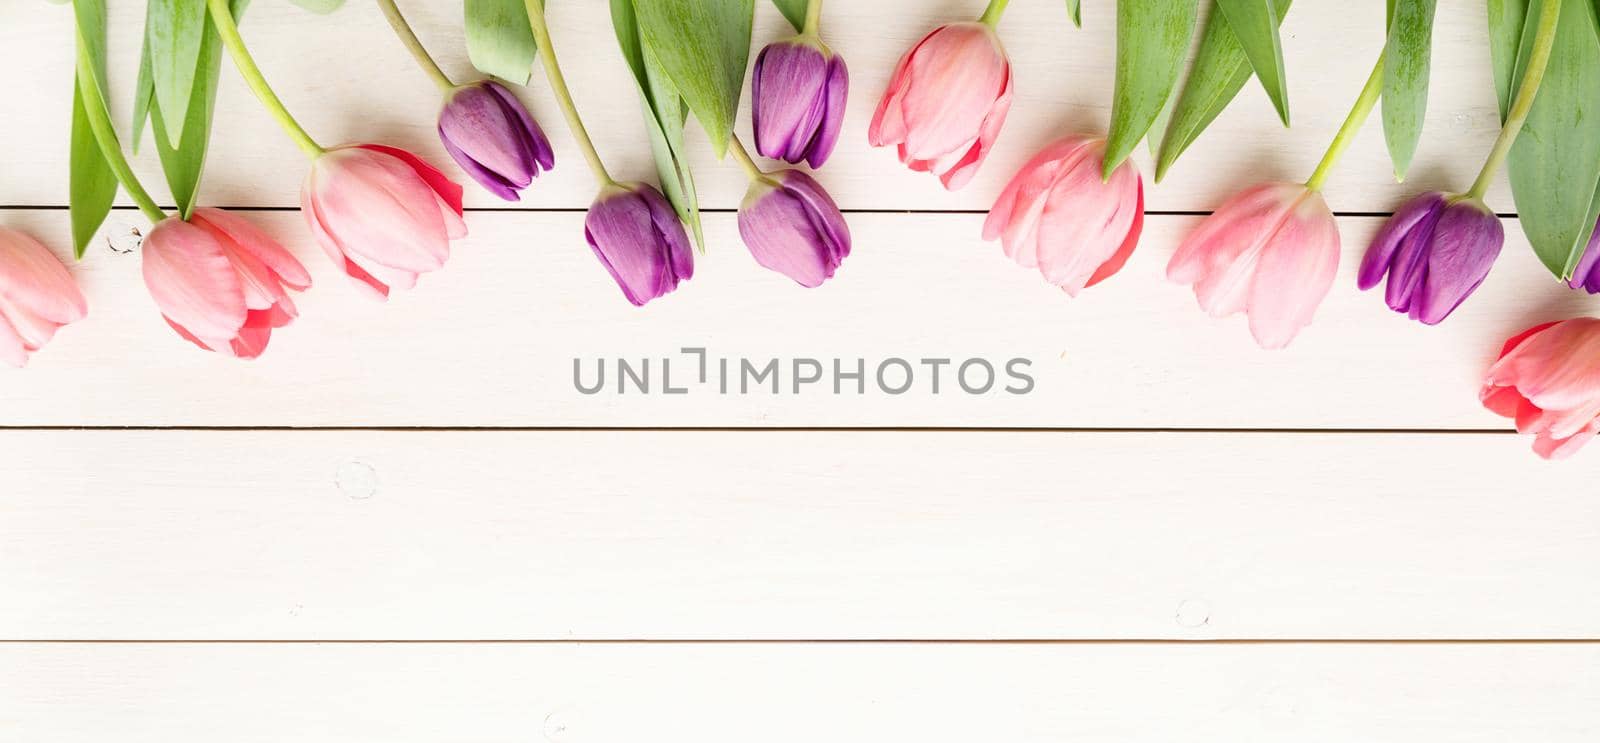 pink and purple tulips over white wooden table background by Desperada